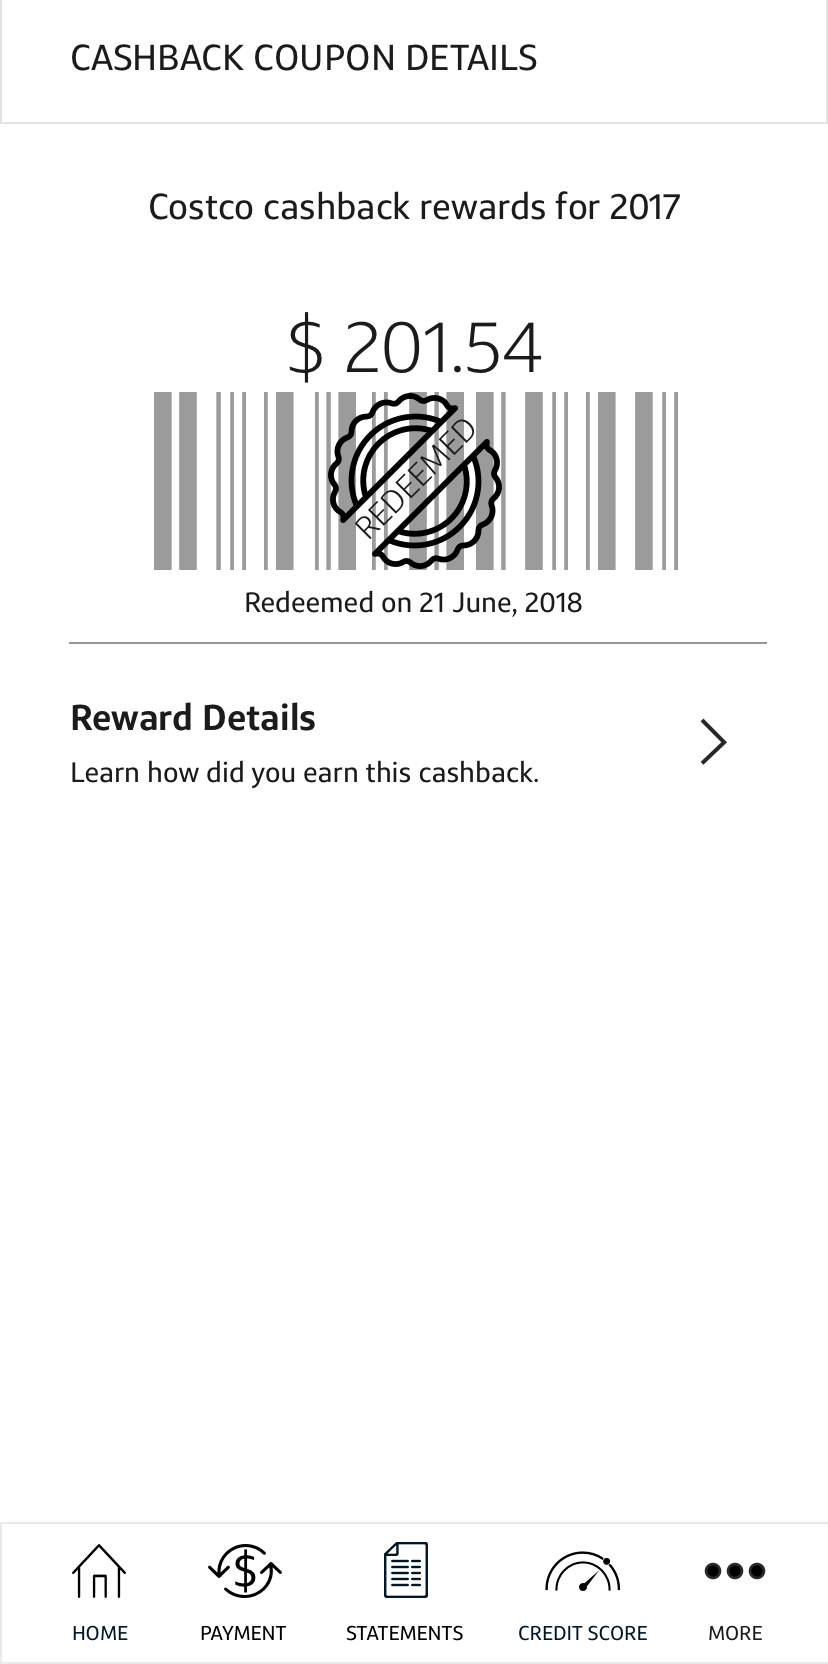 Coupon Details – Redeemed